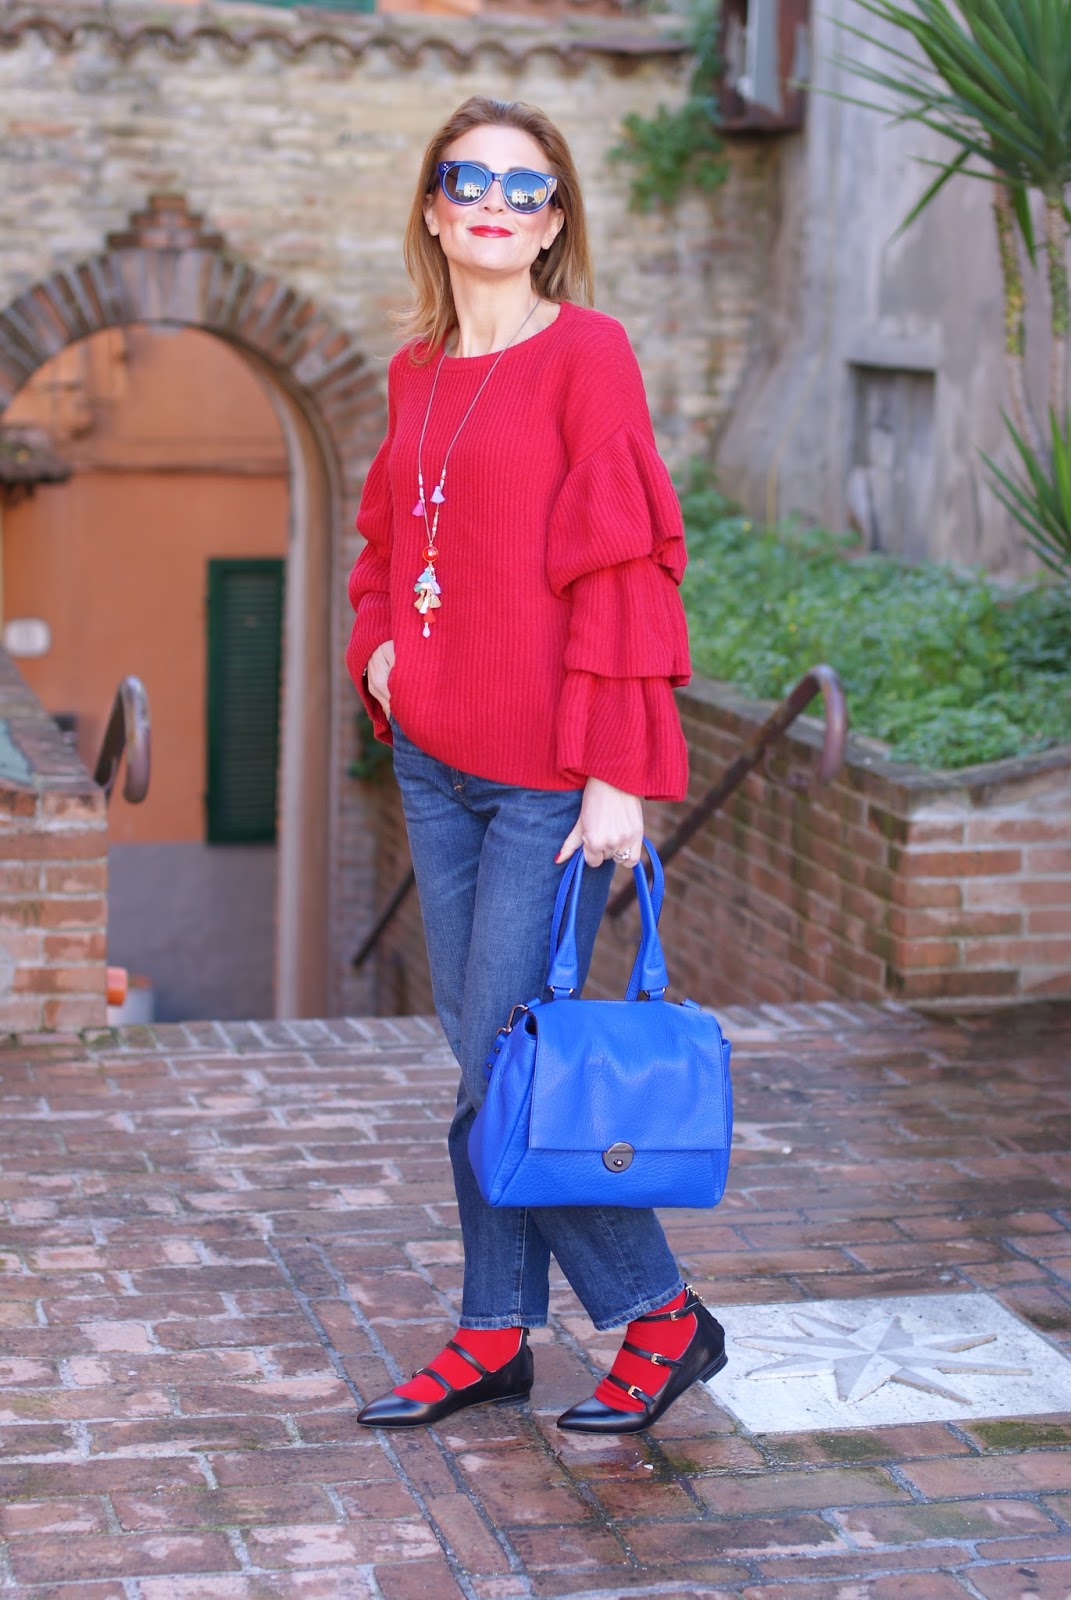 Ruffle sleeves top, Sergio Amaranti shoes and Milly Wythe satchel bag on Fashion and Cookies fashion blog, fashion blogger style